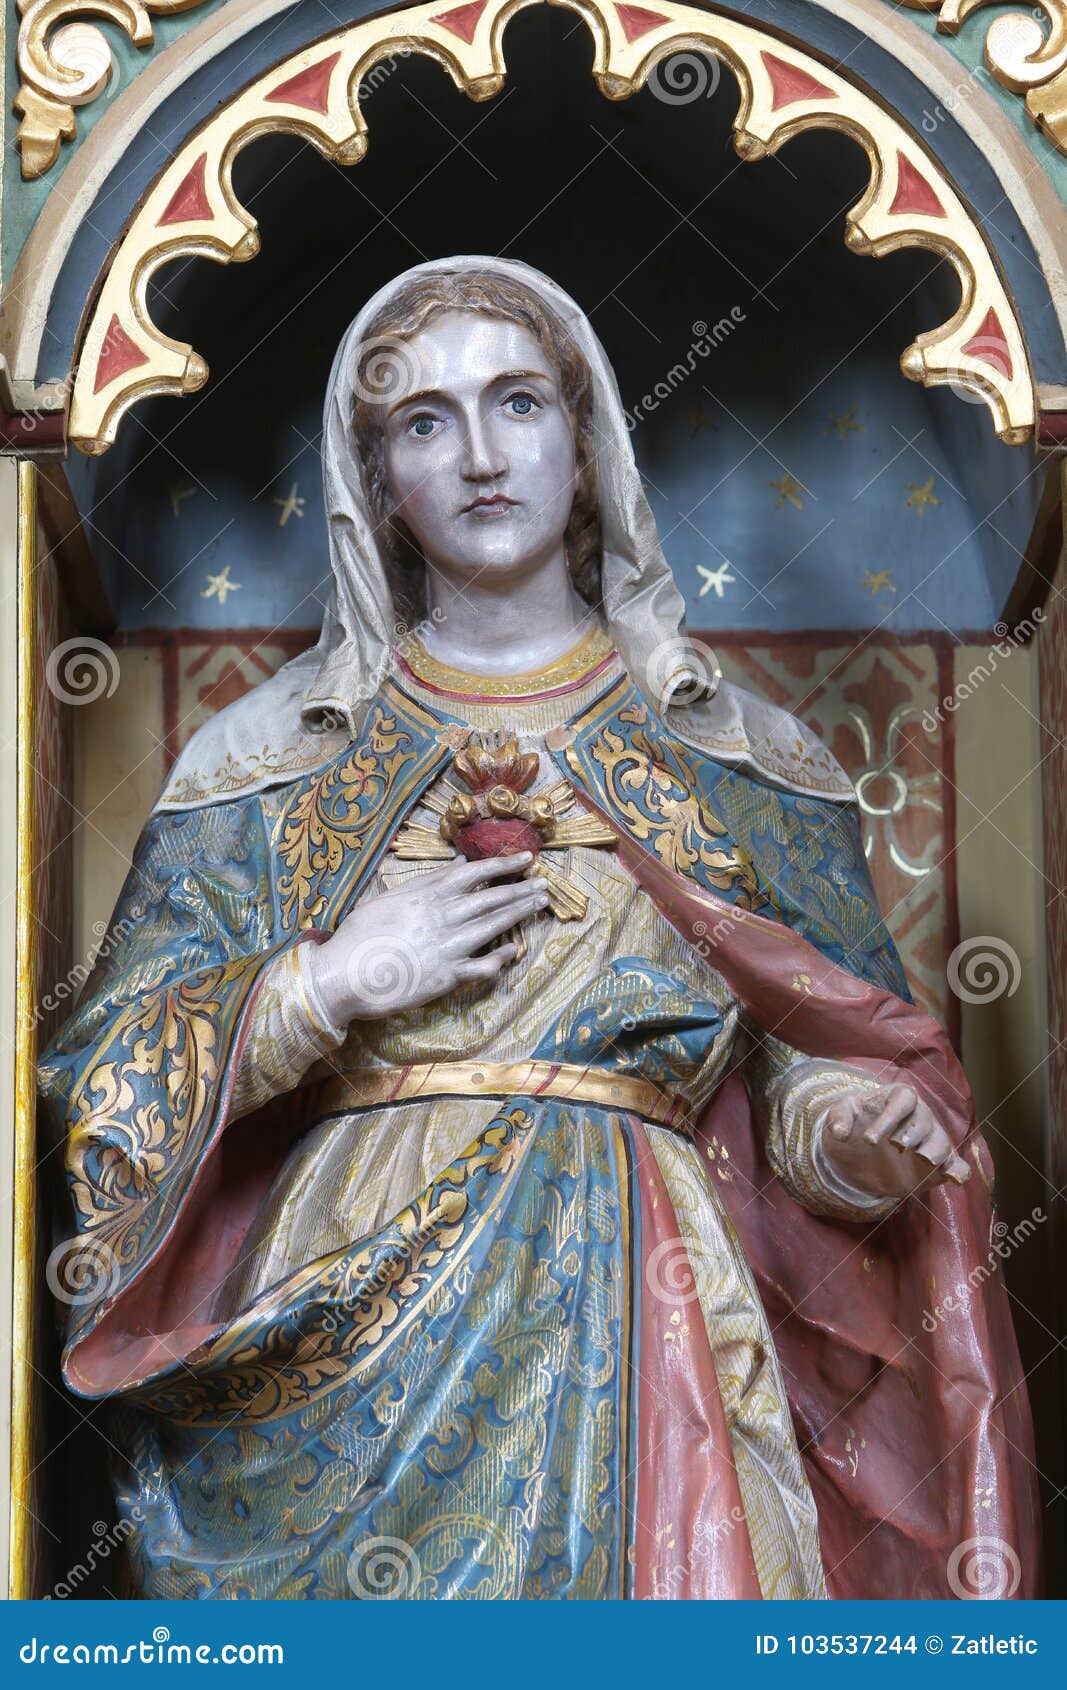 Immaculate heart of Mary stock photo. Image of colorful - 103537244